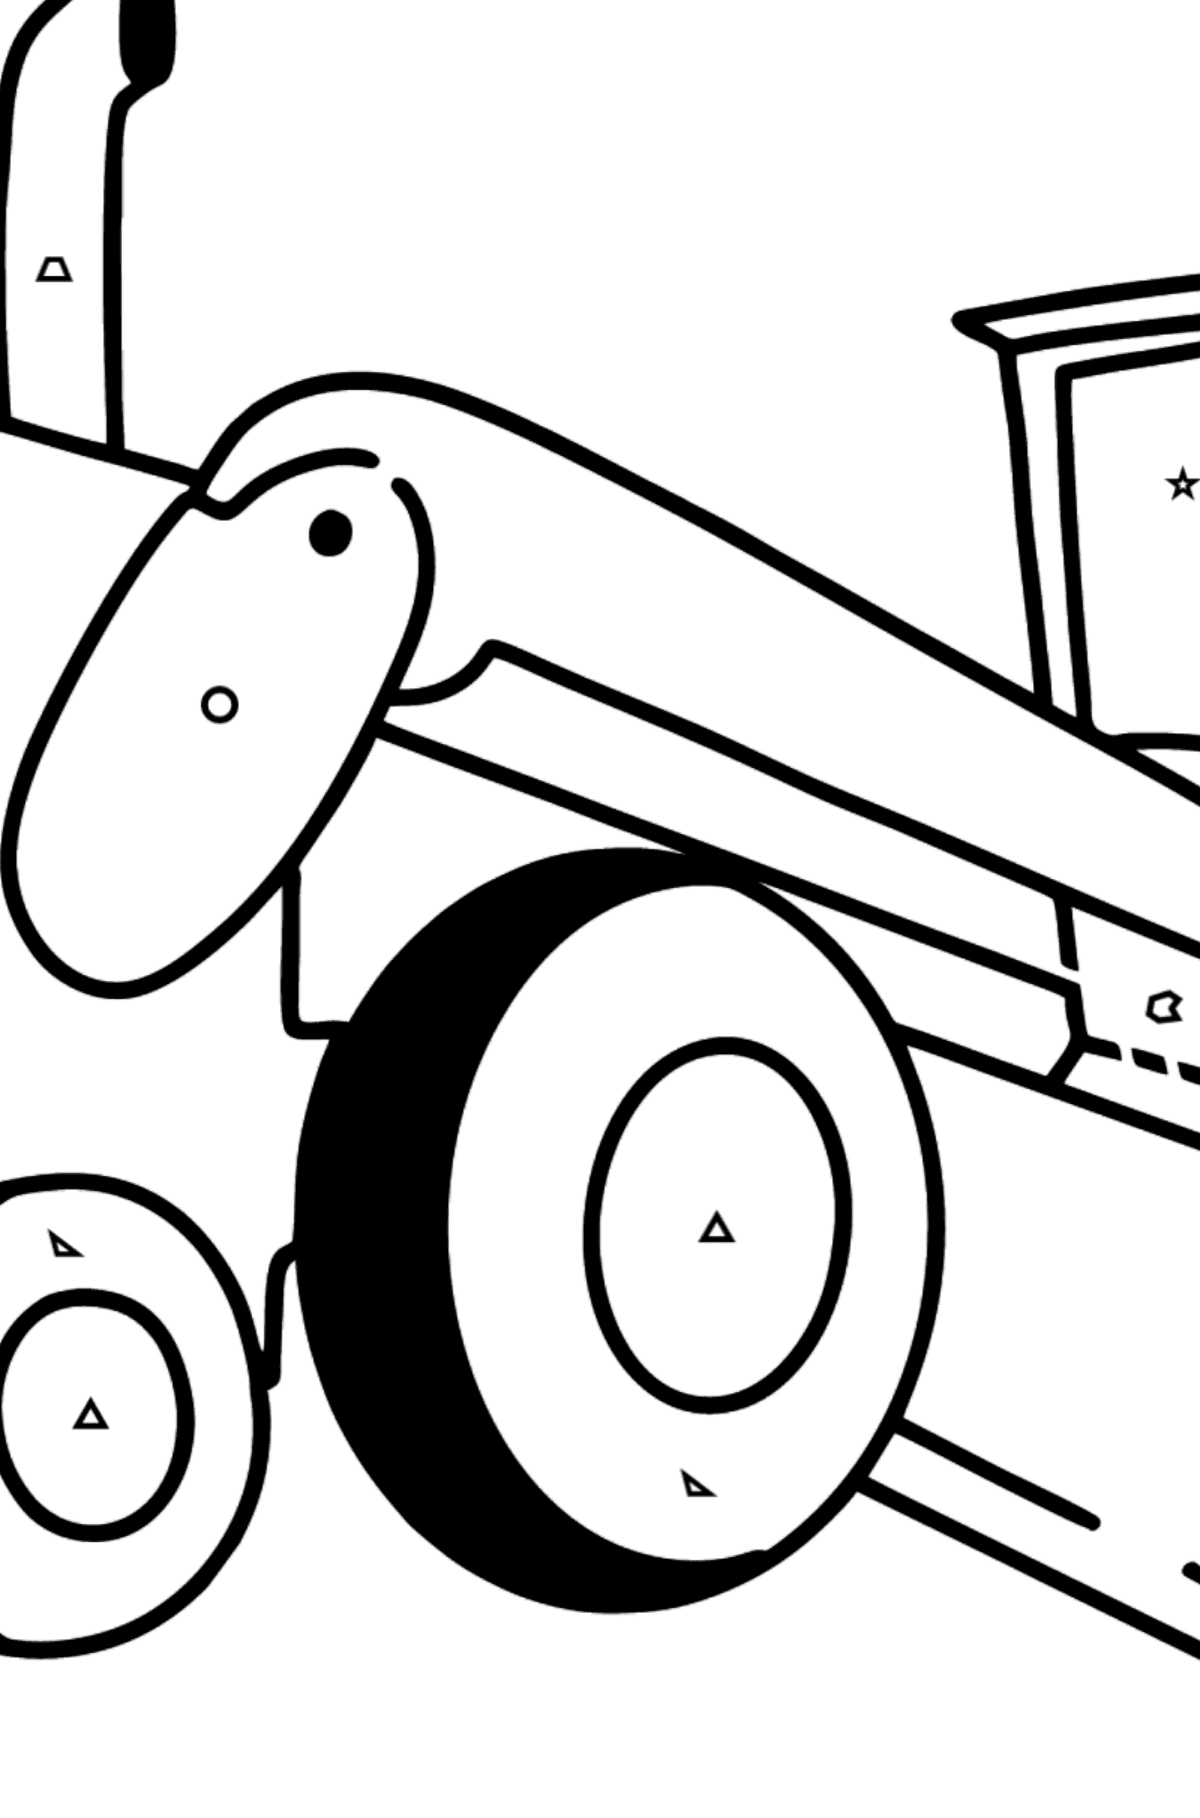 Tractor Grader coloring page - Coloring by Geometric Shapes for Kids